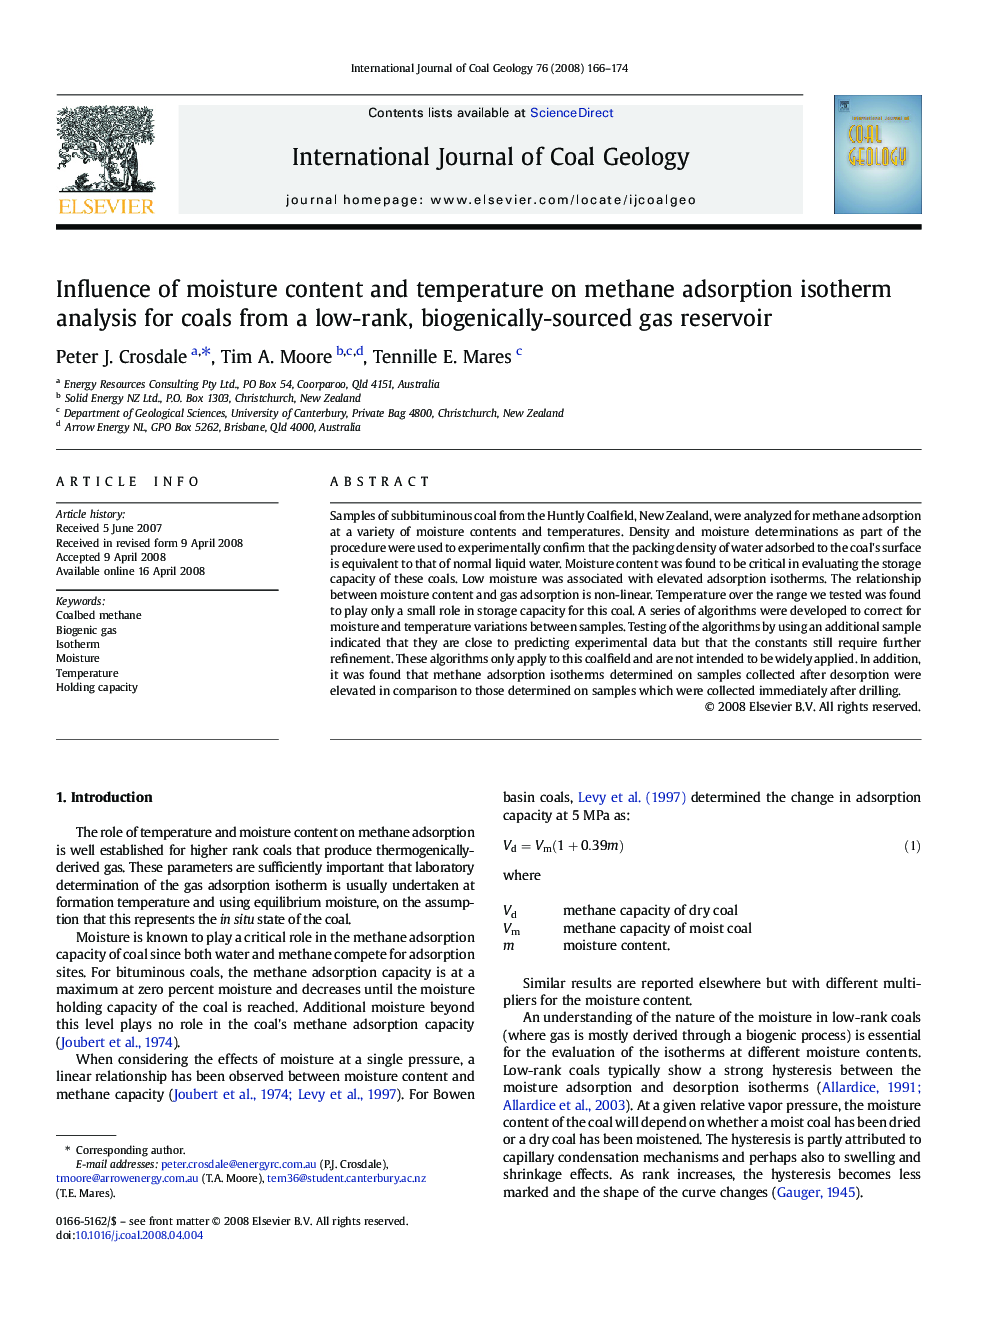 Influence of moisture content and temperature on methane adsorption isotherm analysis for coals from a low-rank, biogenically-sourced gas reservoir